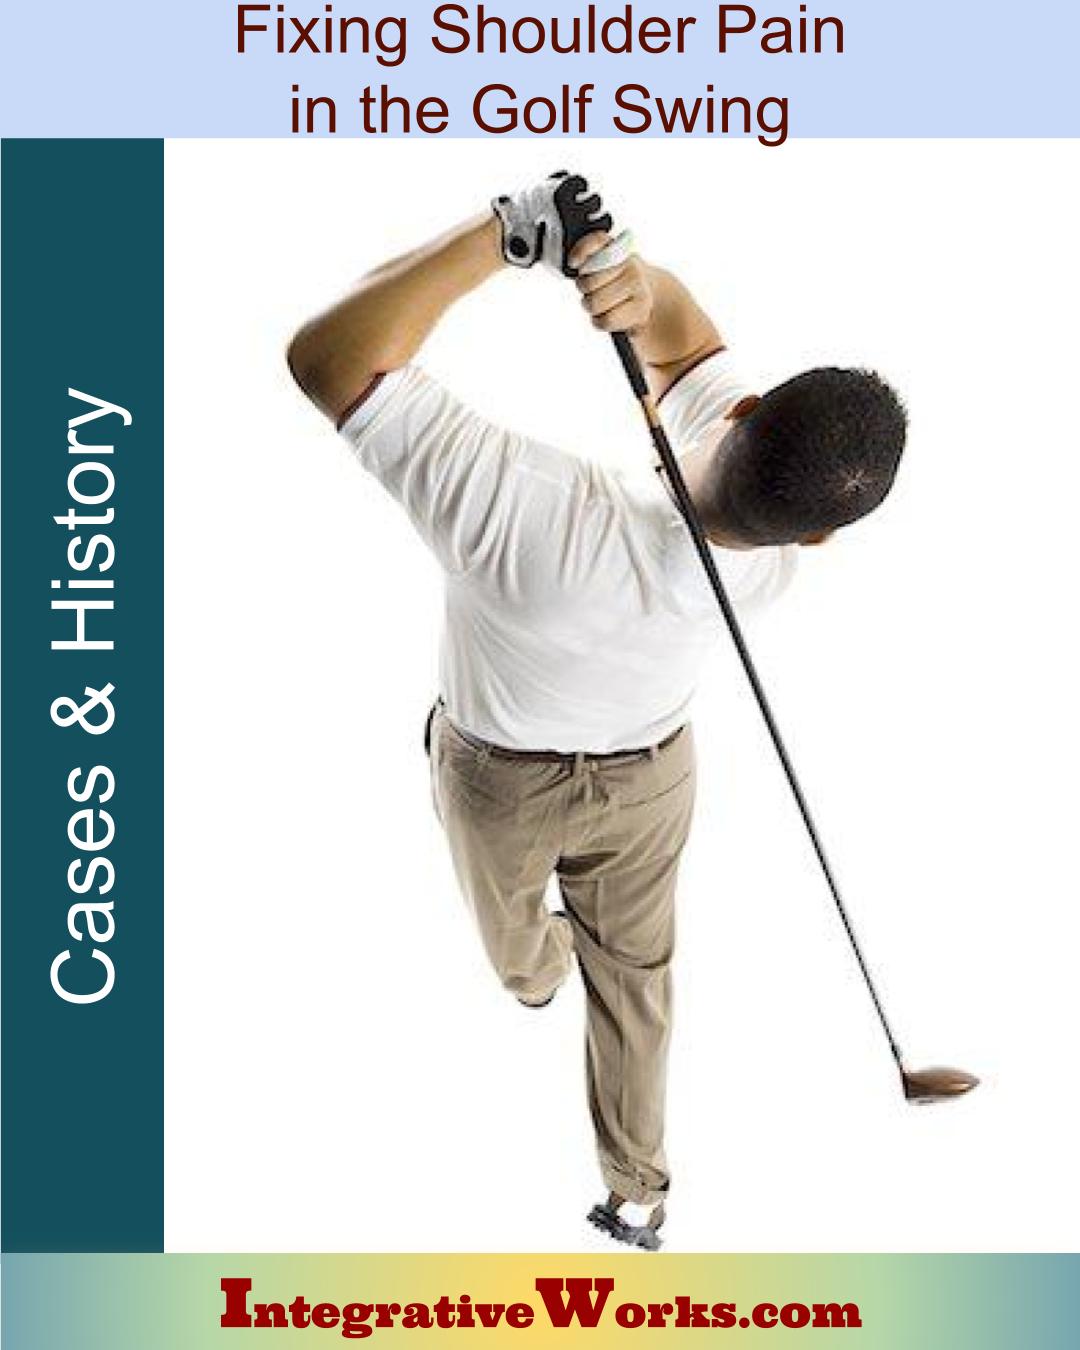 Fixing Shoulder Pain in the Golf Swing